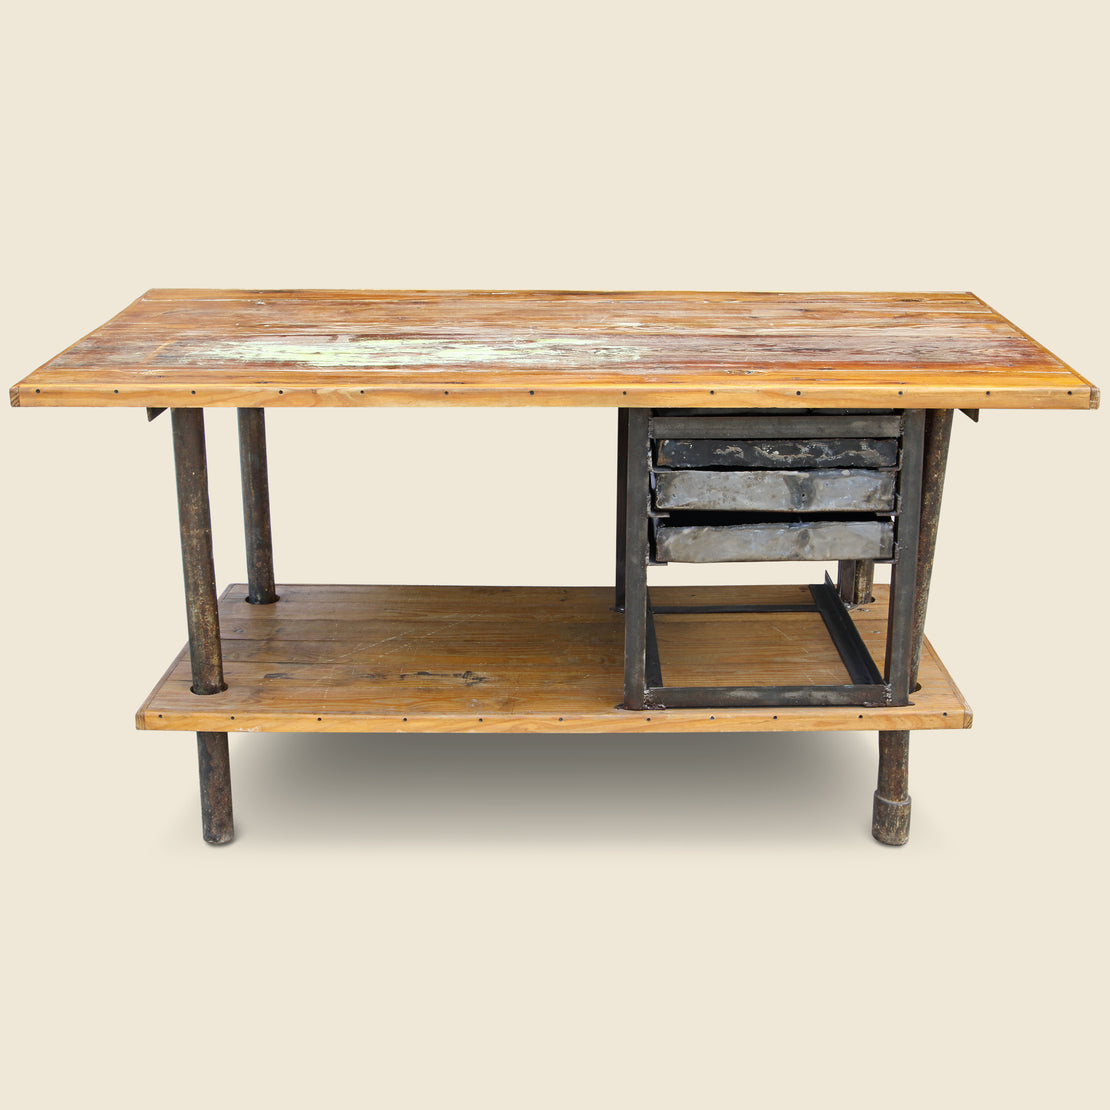 Wooden Industrial Table with Metal Drawers